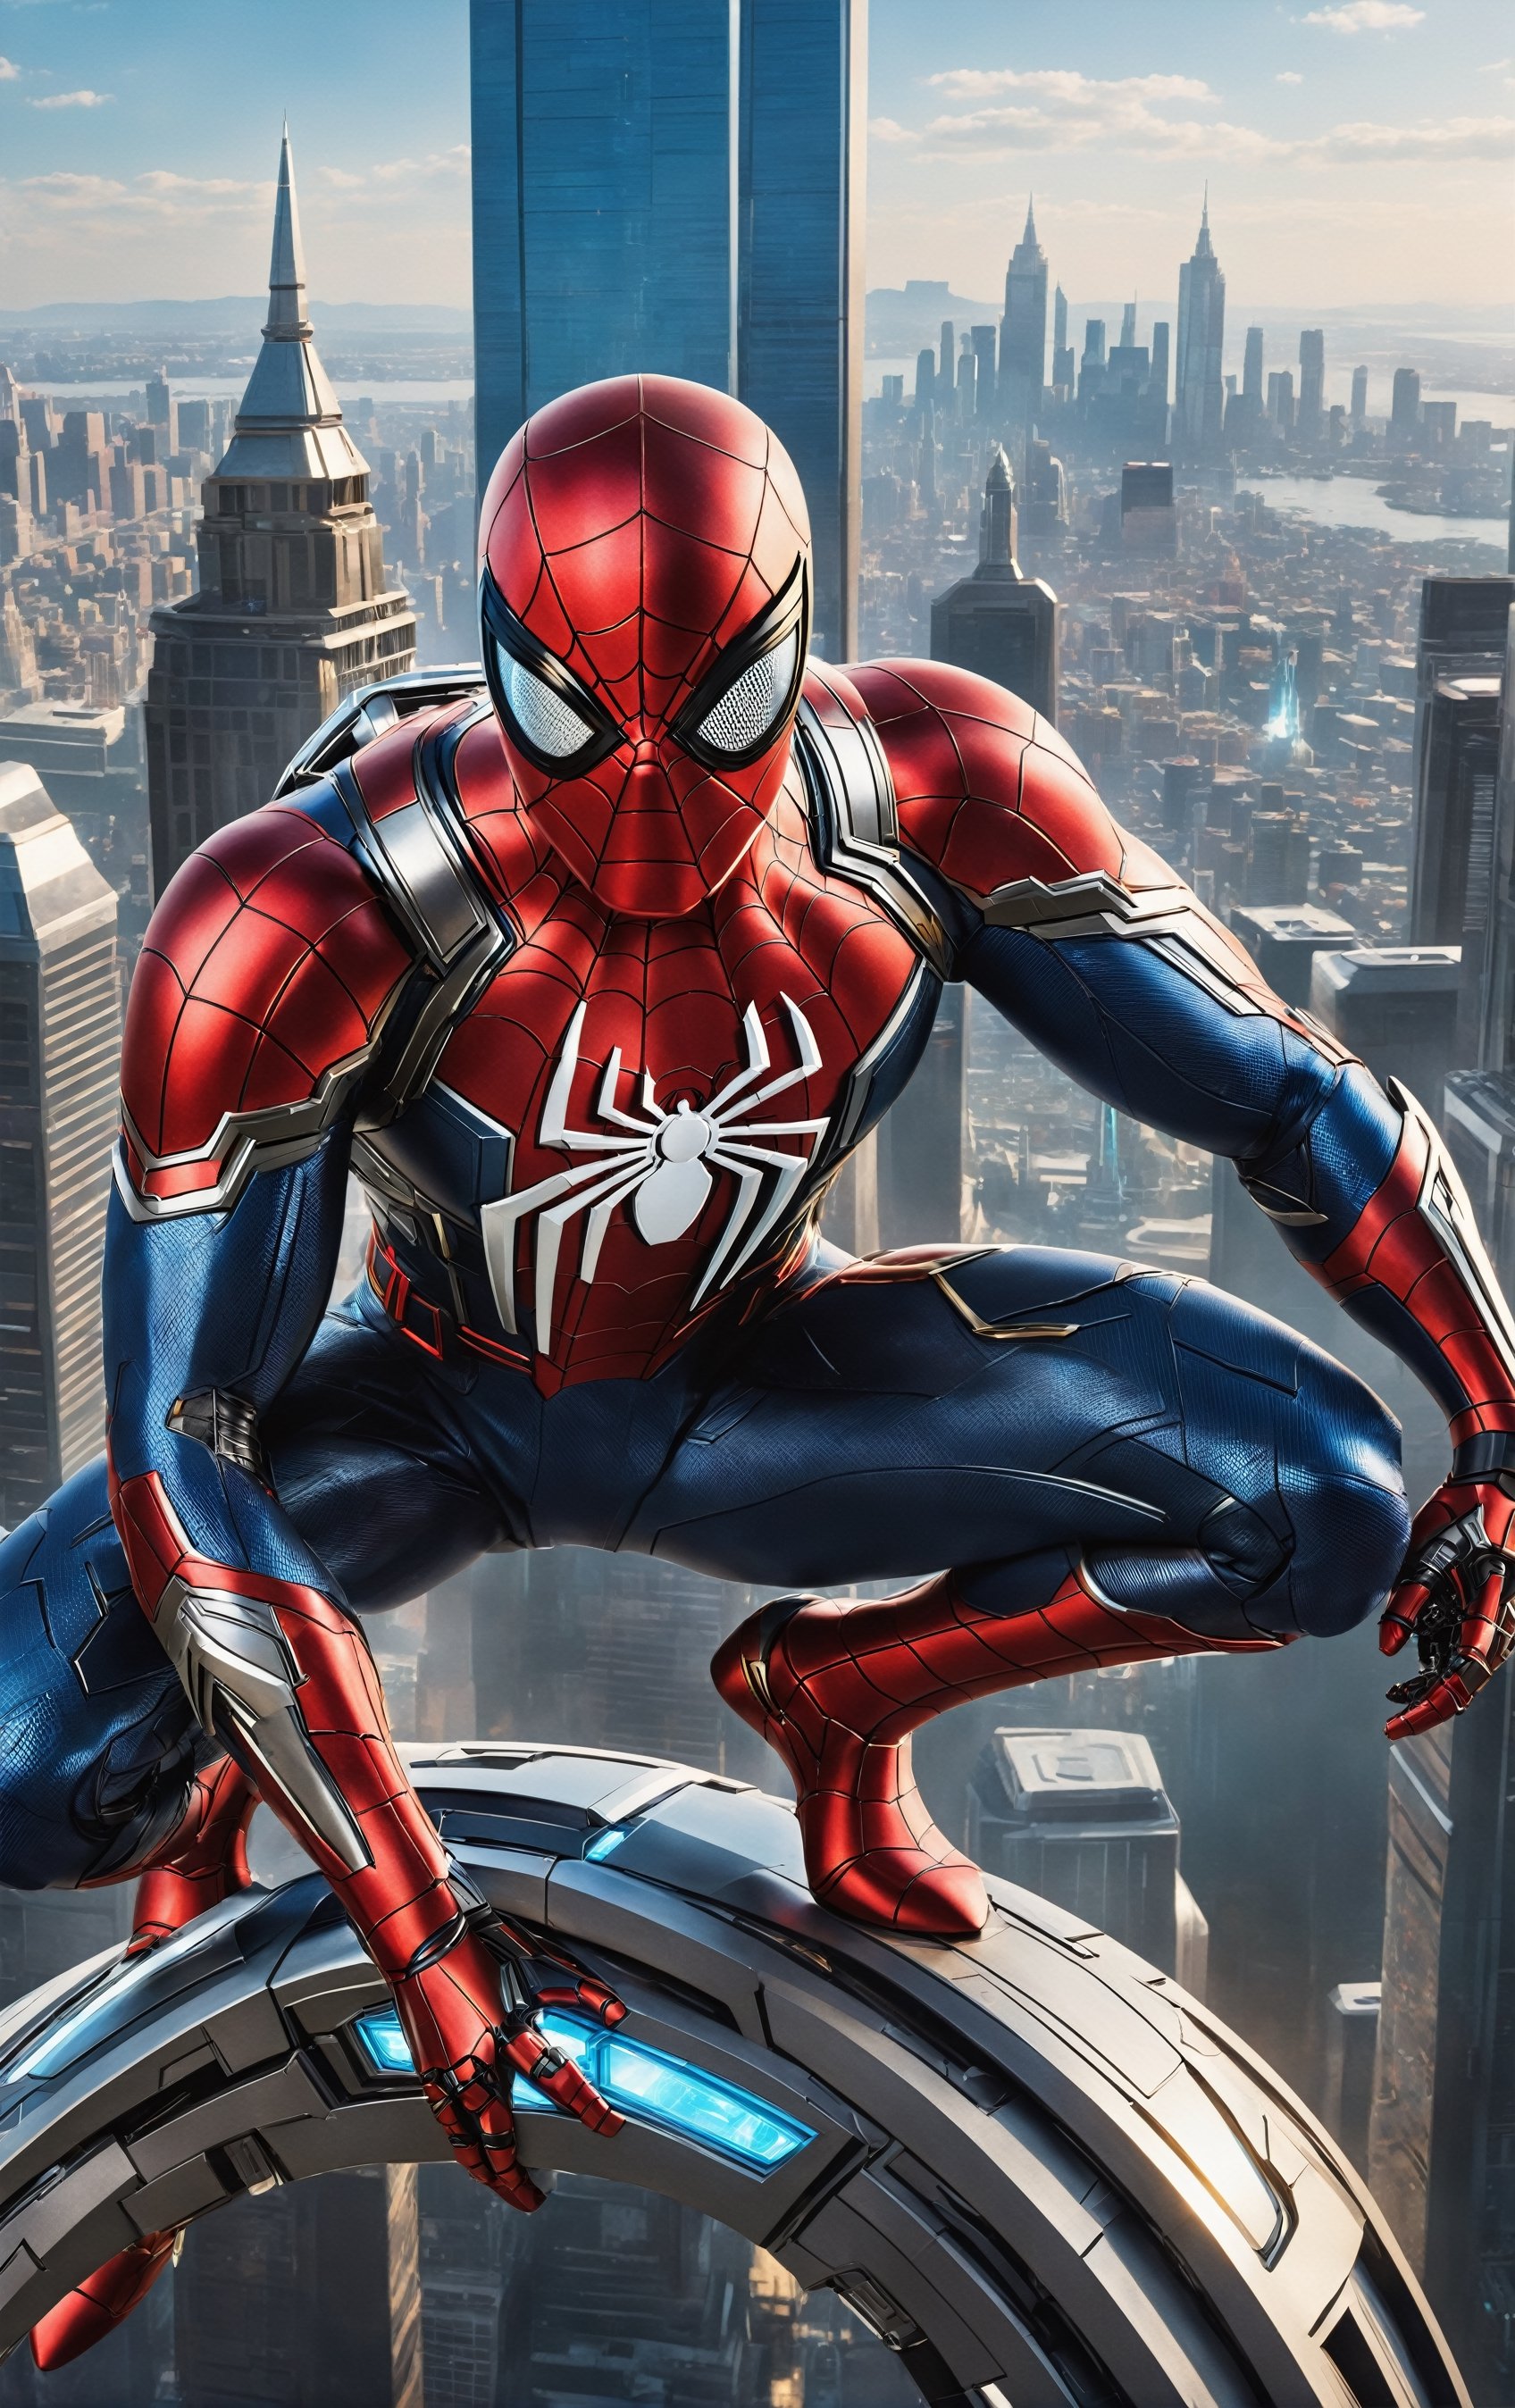 
In the futuristic expanse of Spider-Man Beyond, witness the emergence of a mecha-robo-soldier, a formidable fusion of cutting-edge technology and the iconic Spider-Man legacy. This hyper-detailed vision showcases the sleek, robotic suit that seamlessly incorporates the agility of Spider-Man's traditional costume with advanced mecha elements. The metallic exoskeleton gleams with futuristic materials, and luminescent accents highlight the arachnid-inspired design. The mecha-robo-soldier embodies both strength and agility, standing tall in the gleaming cityscape, ready to combat future threats. Against the backdrop of towering skyscrapers adorned with holographic displays, Spider-Man Beyond's mecha-robo-soldier navigates the futuristic realm with a captivating blend of innovation and superhero prowess. This cinematic portrayal envisions a future where Spider-Man's legacy evolves into a technologically advanced and visually stunning force for good in the ever-changing landscapes of tomorrow.,photo r3al